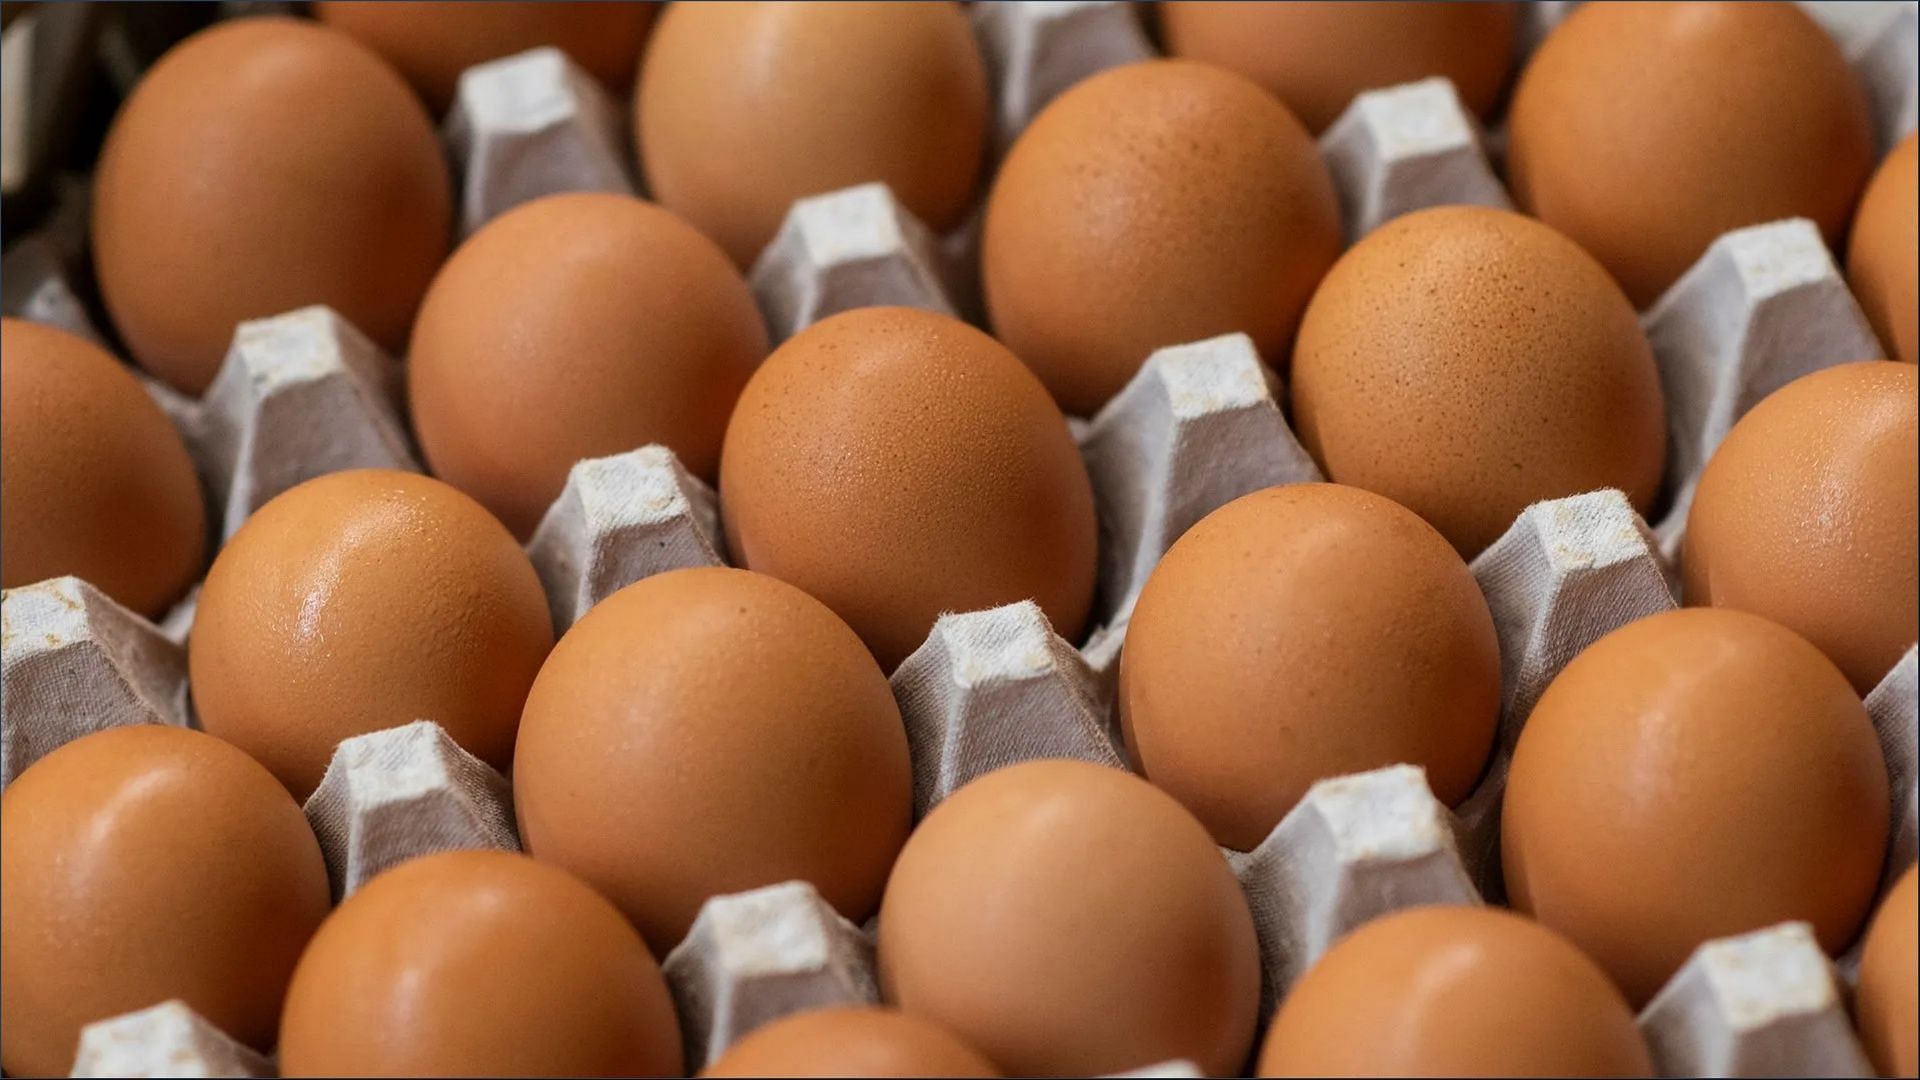 Cal-Maine Foods halts egg production after reports of bird flu (Image via Cal-Maine Foods)